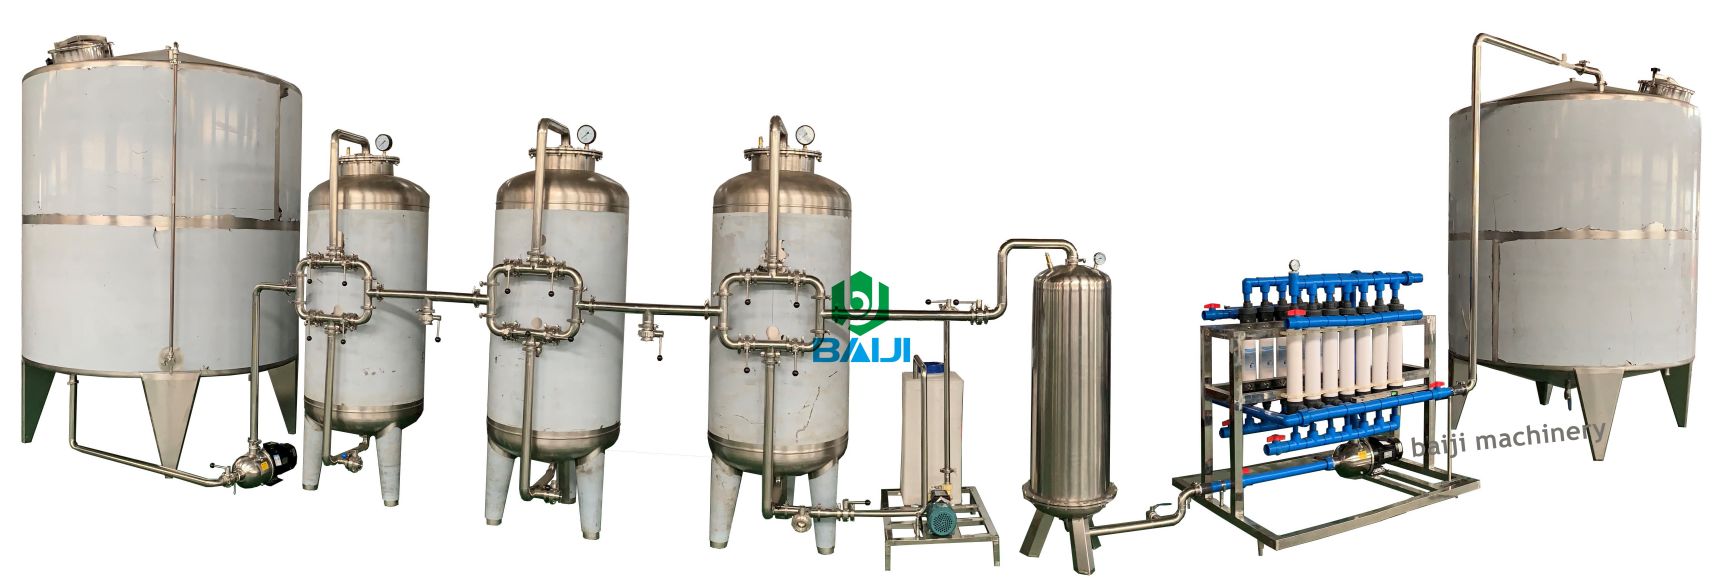 Complete turnkey project water purification and bottling plant / commercial water treatment plant / sea water RO system